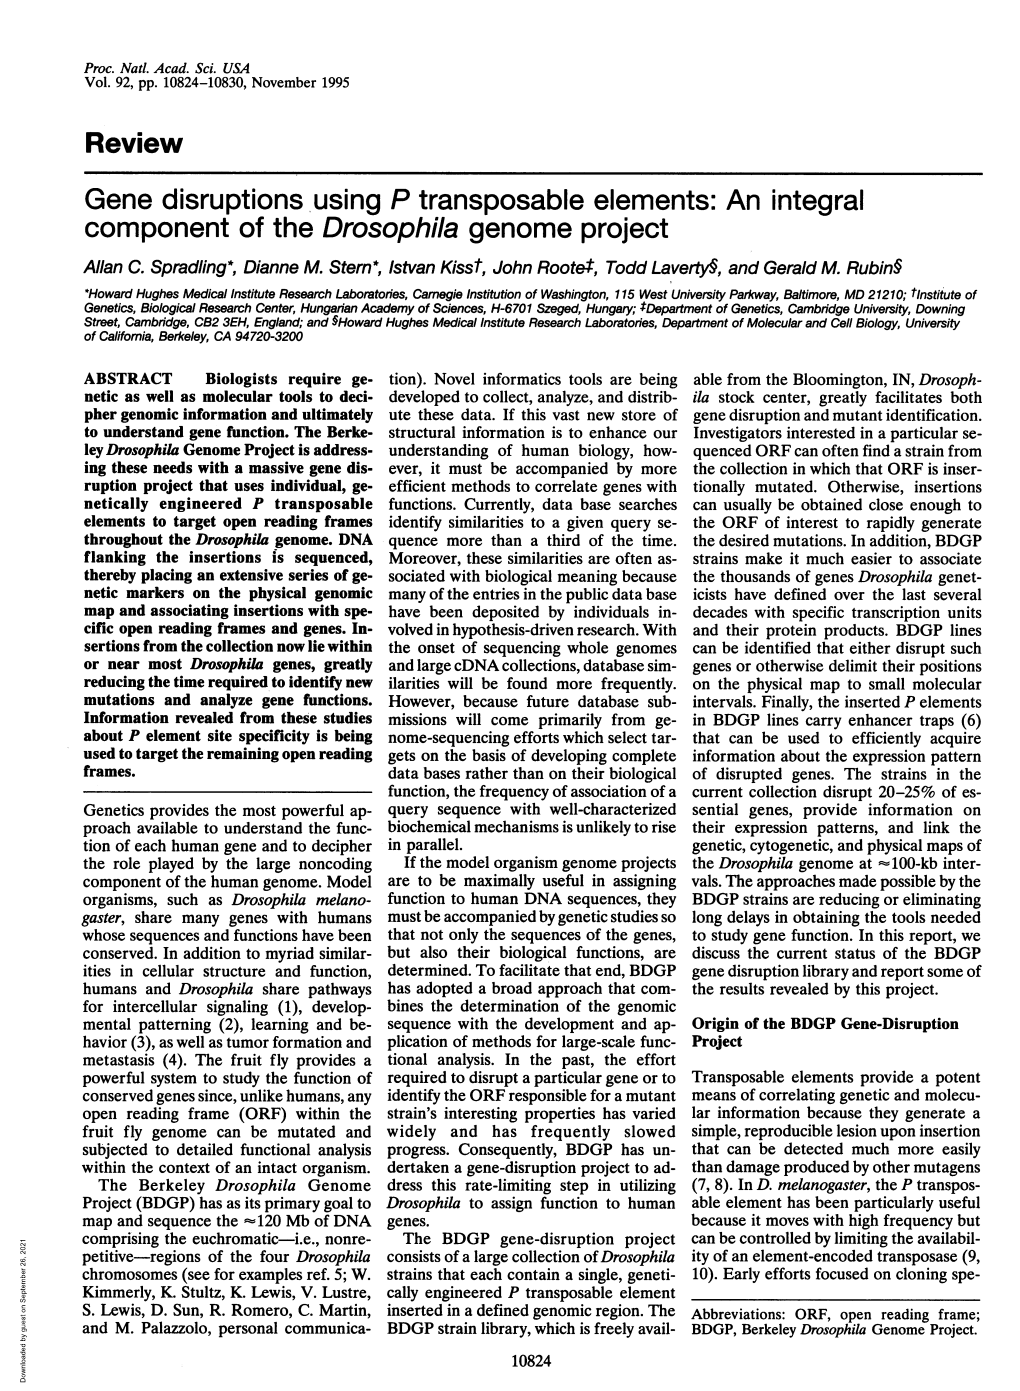 Review Gene Disruptions Using P Transposable Elements: an Integral Component of the Drosophila Genome Project Allan C